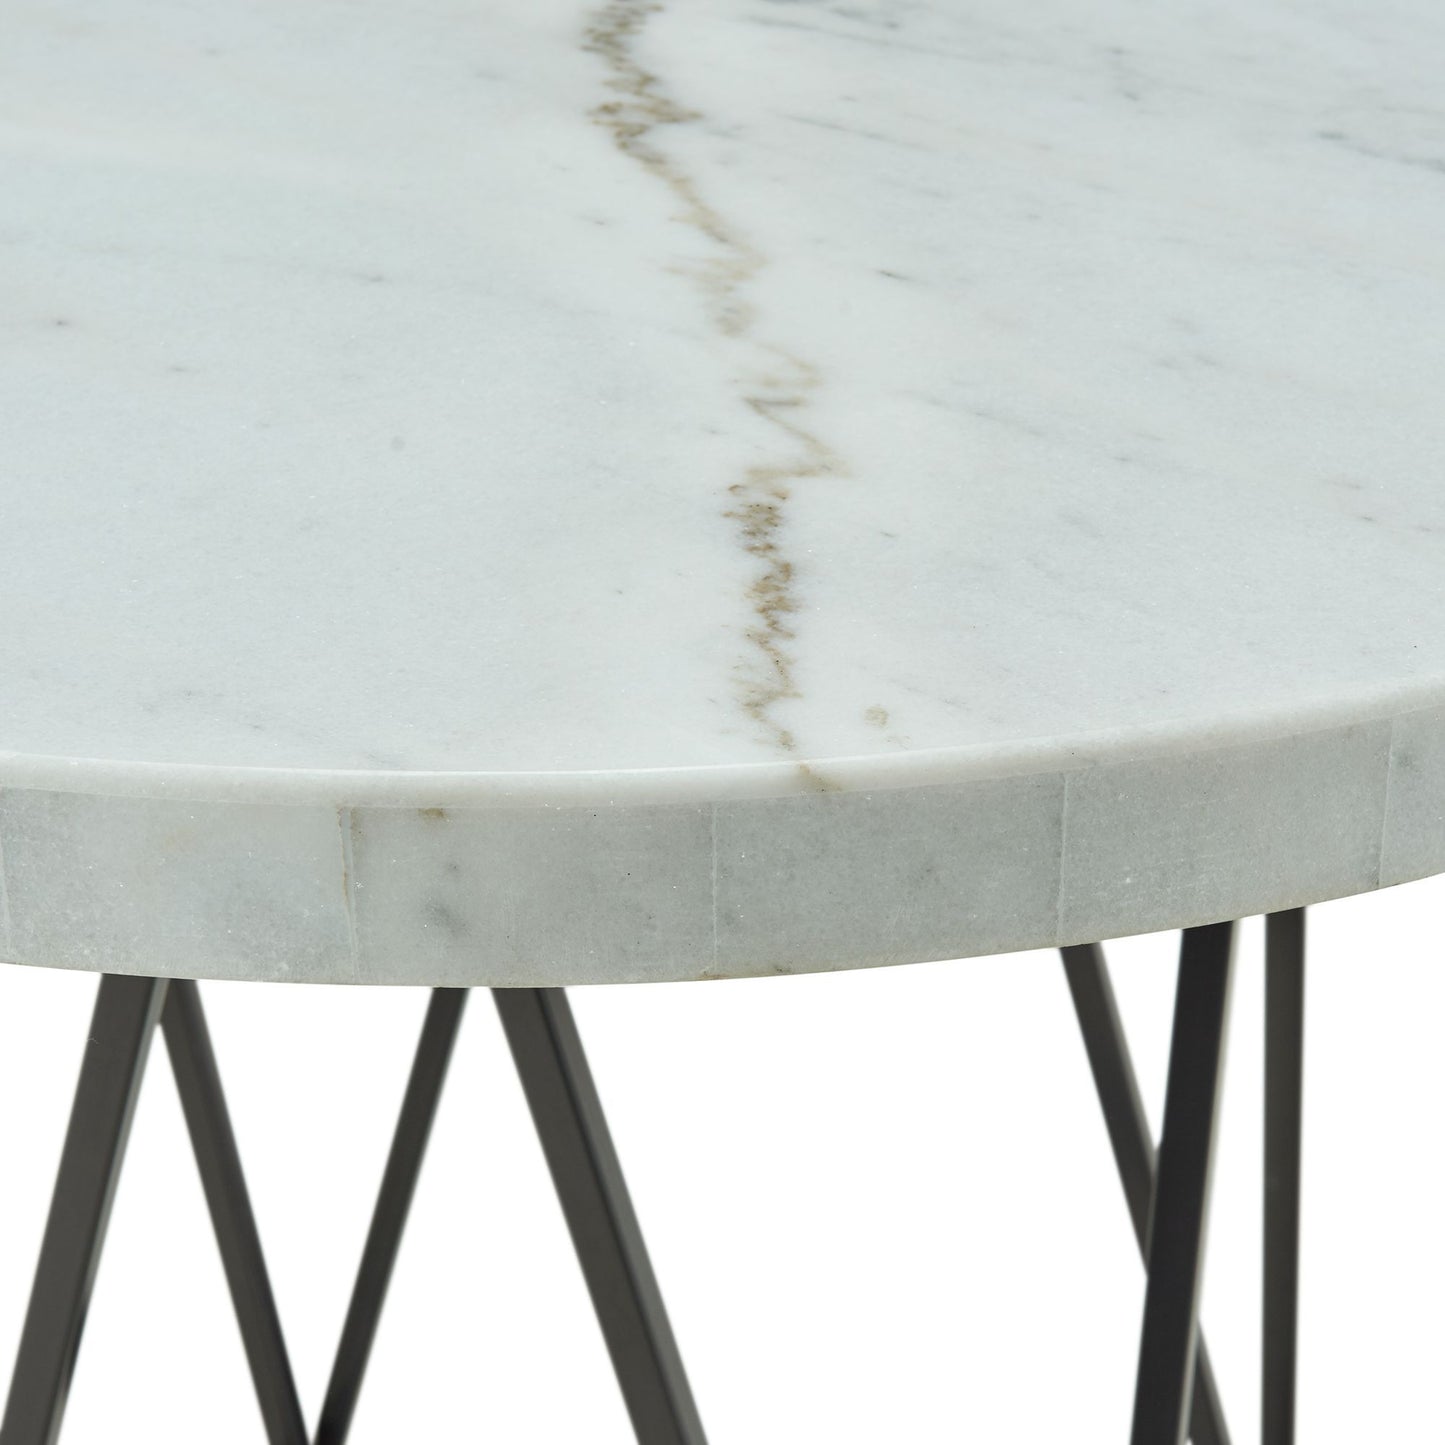 Riko - Round Counter Height Dining Table - White